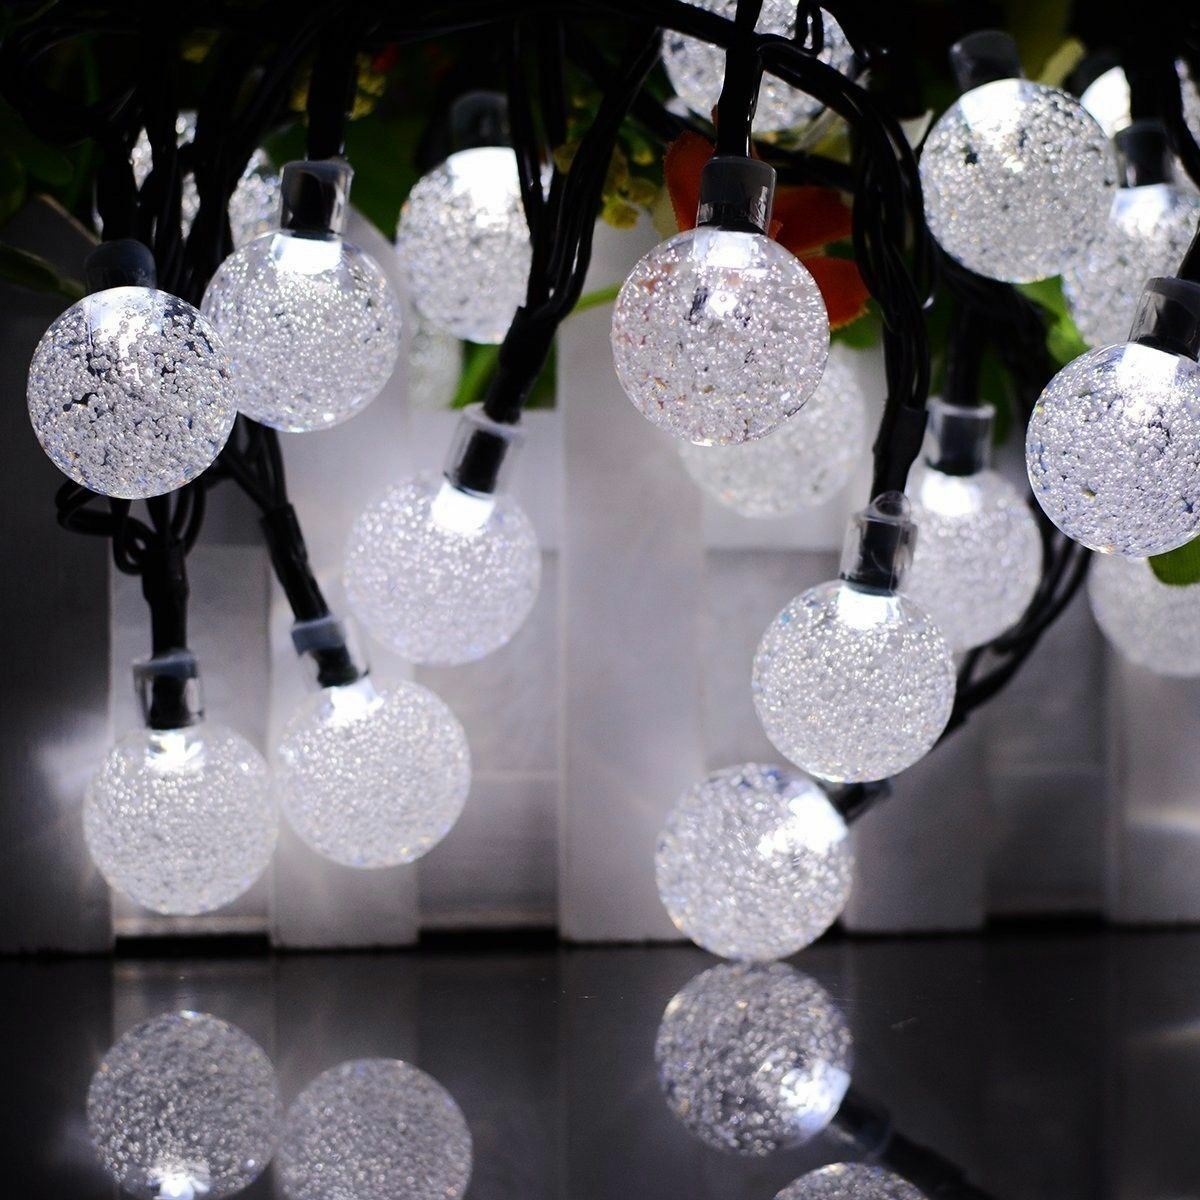 20ft 30 LED Solar String Ball Lights Outdoor Waterproof Warm White Garden Decor LINKPAL Does Not Apply - фотография #7